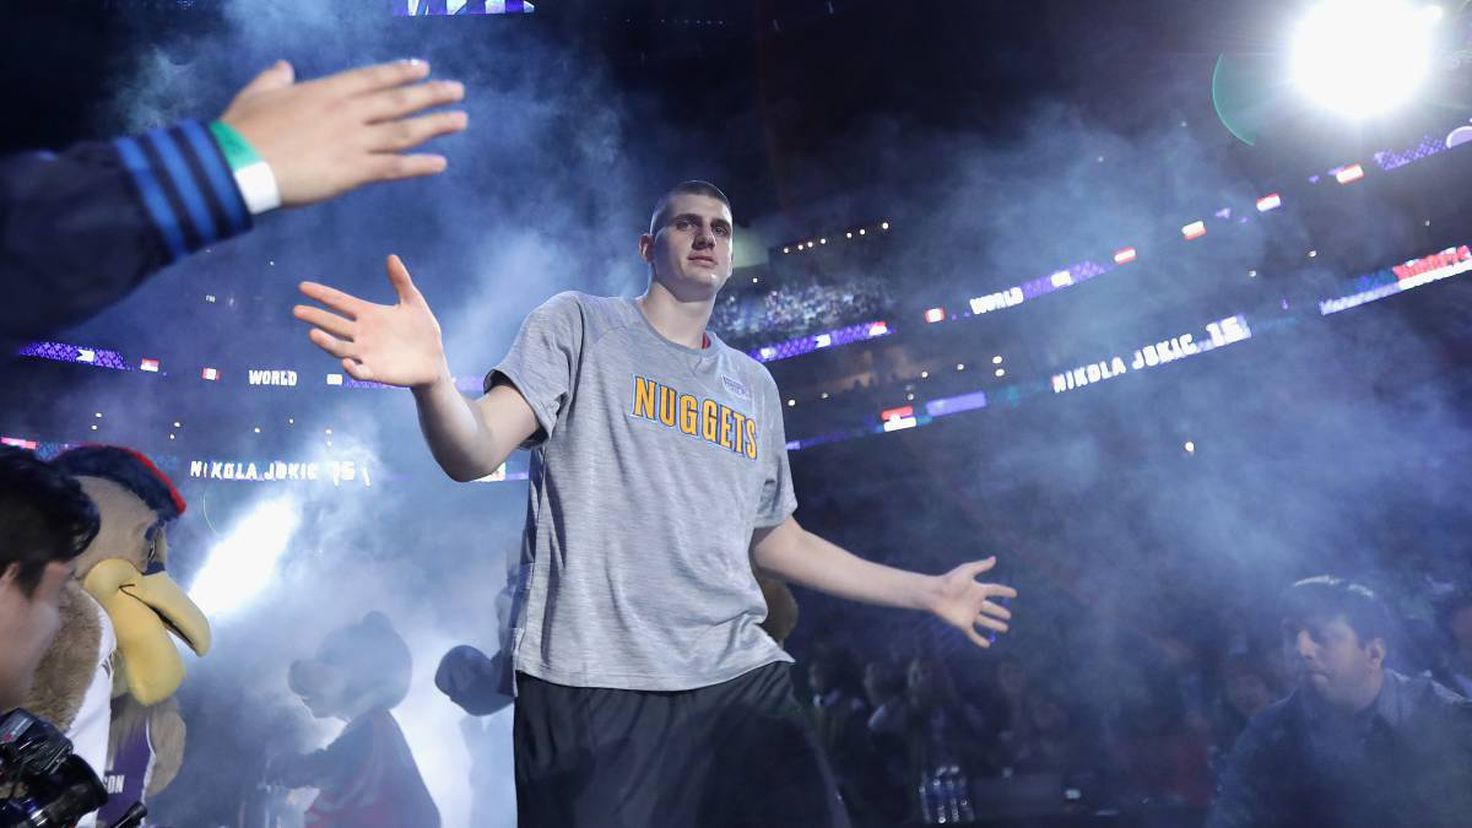 Jokic and the barrier of 400 million
